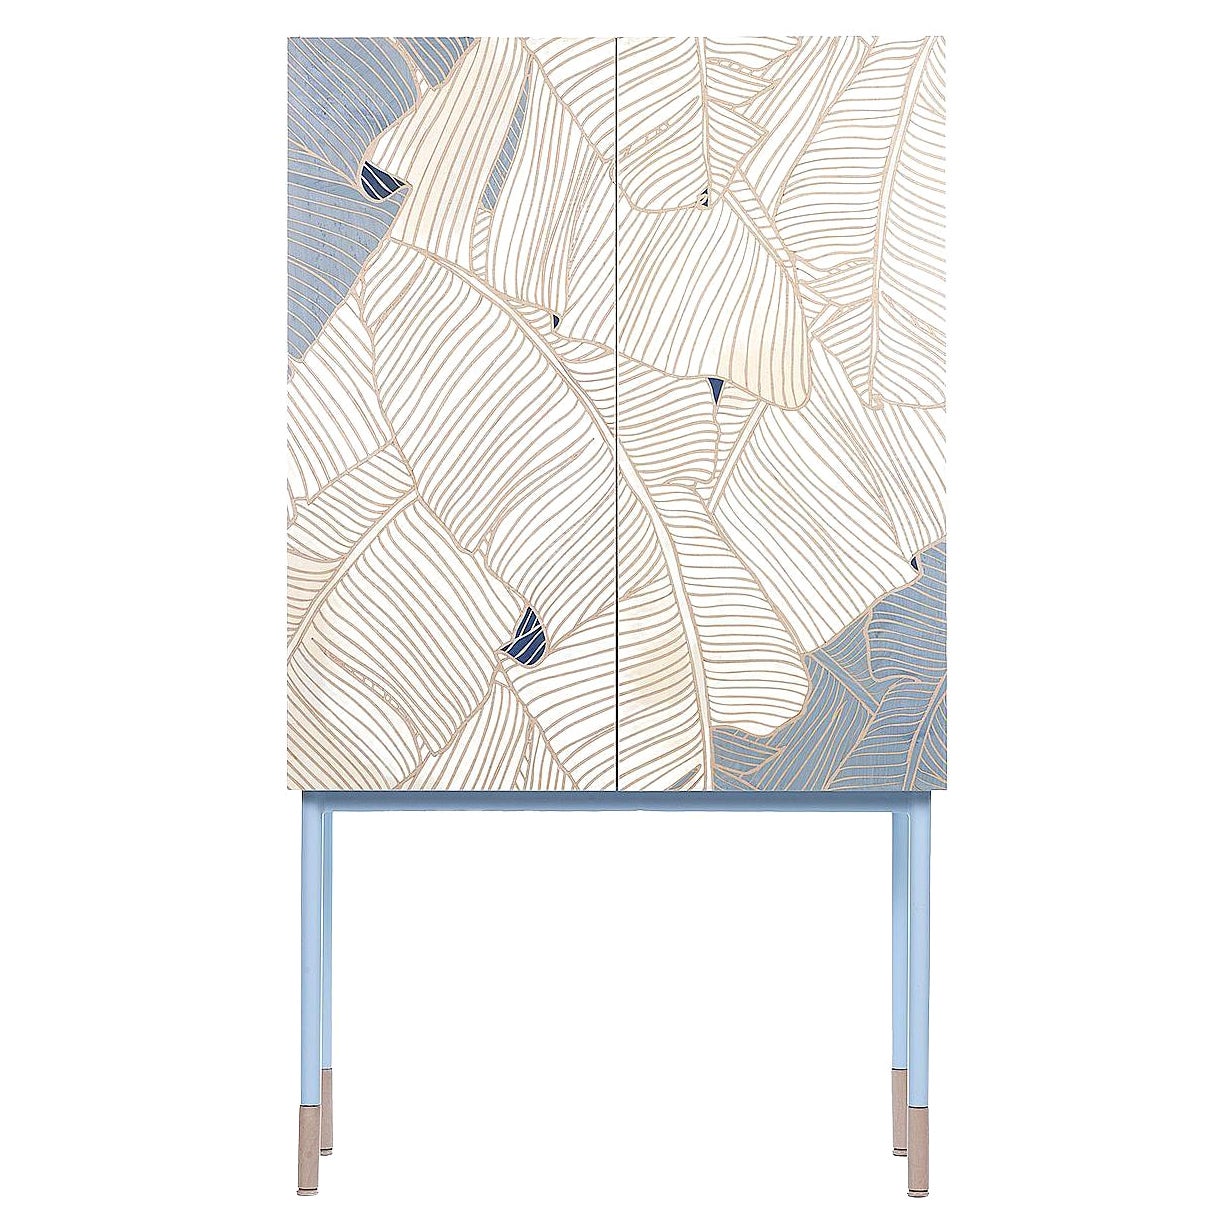 21st Century Basjoo, Inlaid Bar Cabinet in White and Blue Maple, Hebanon, Italy